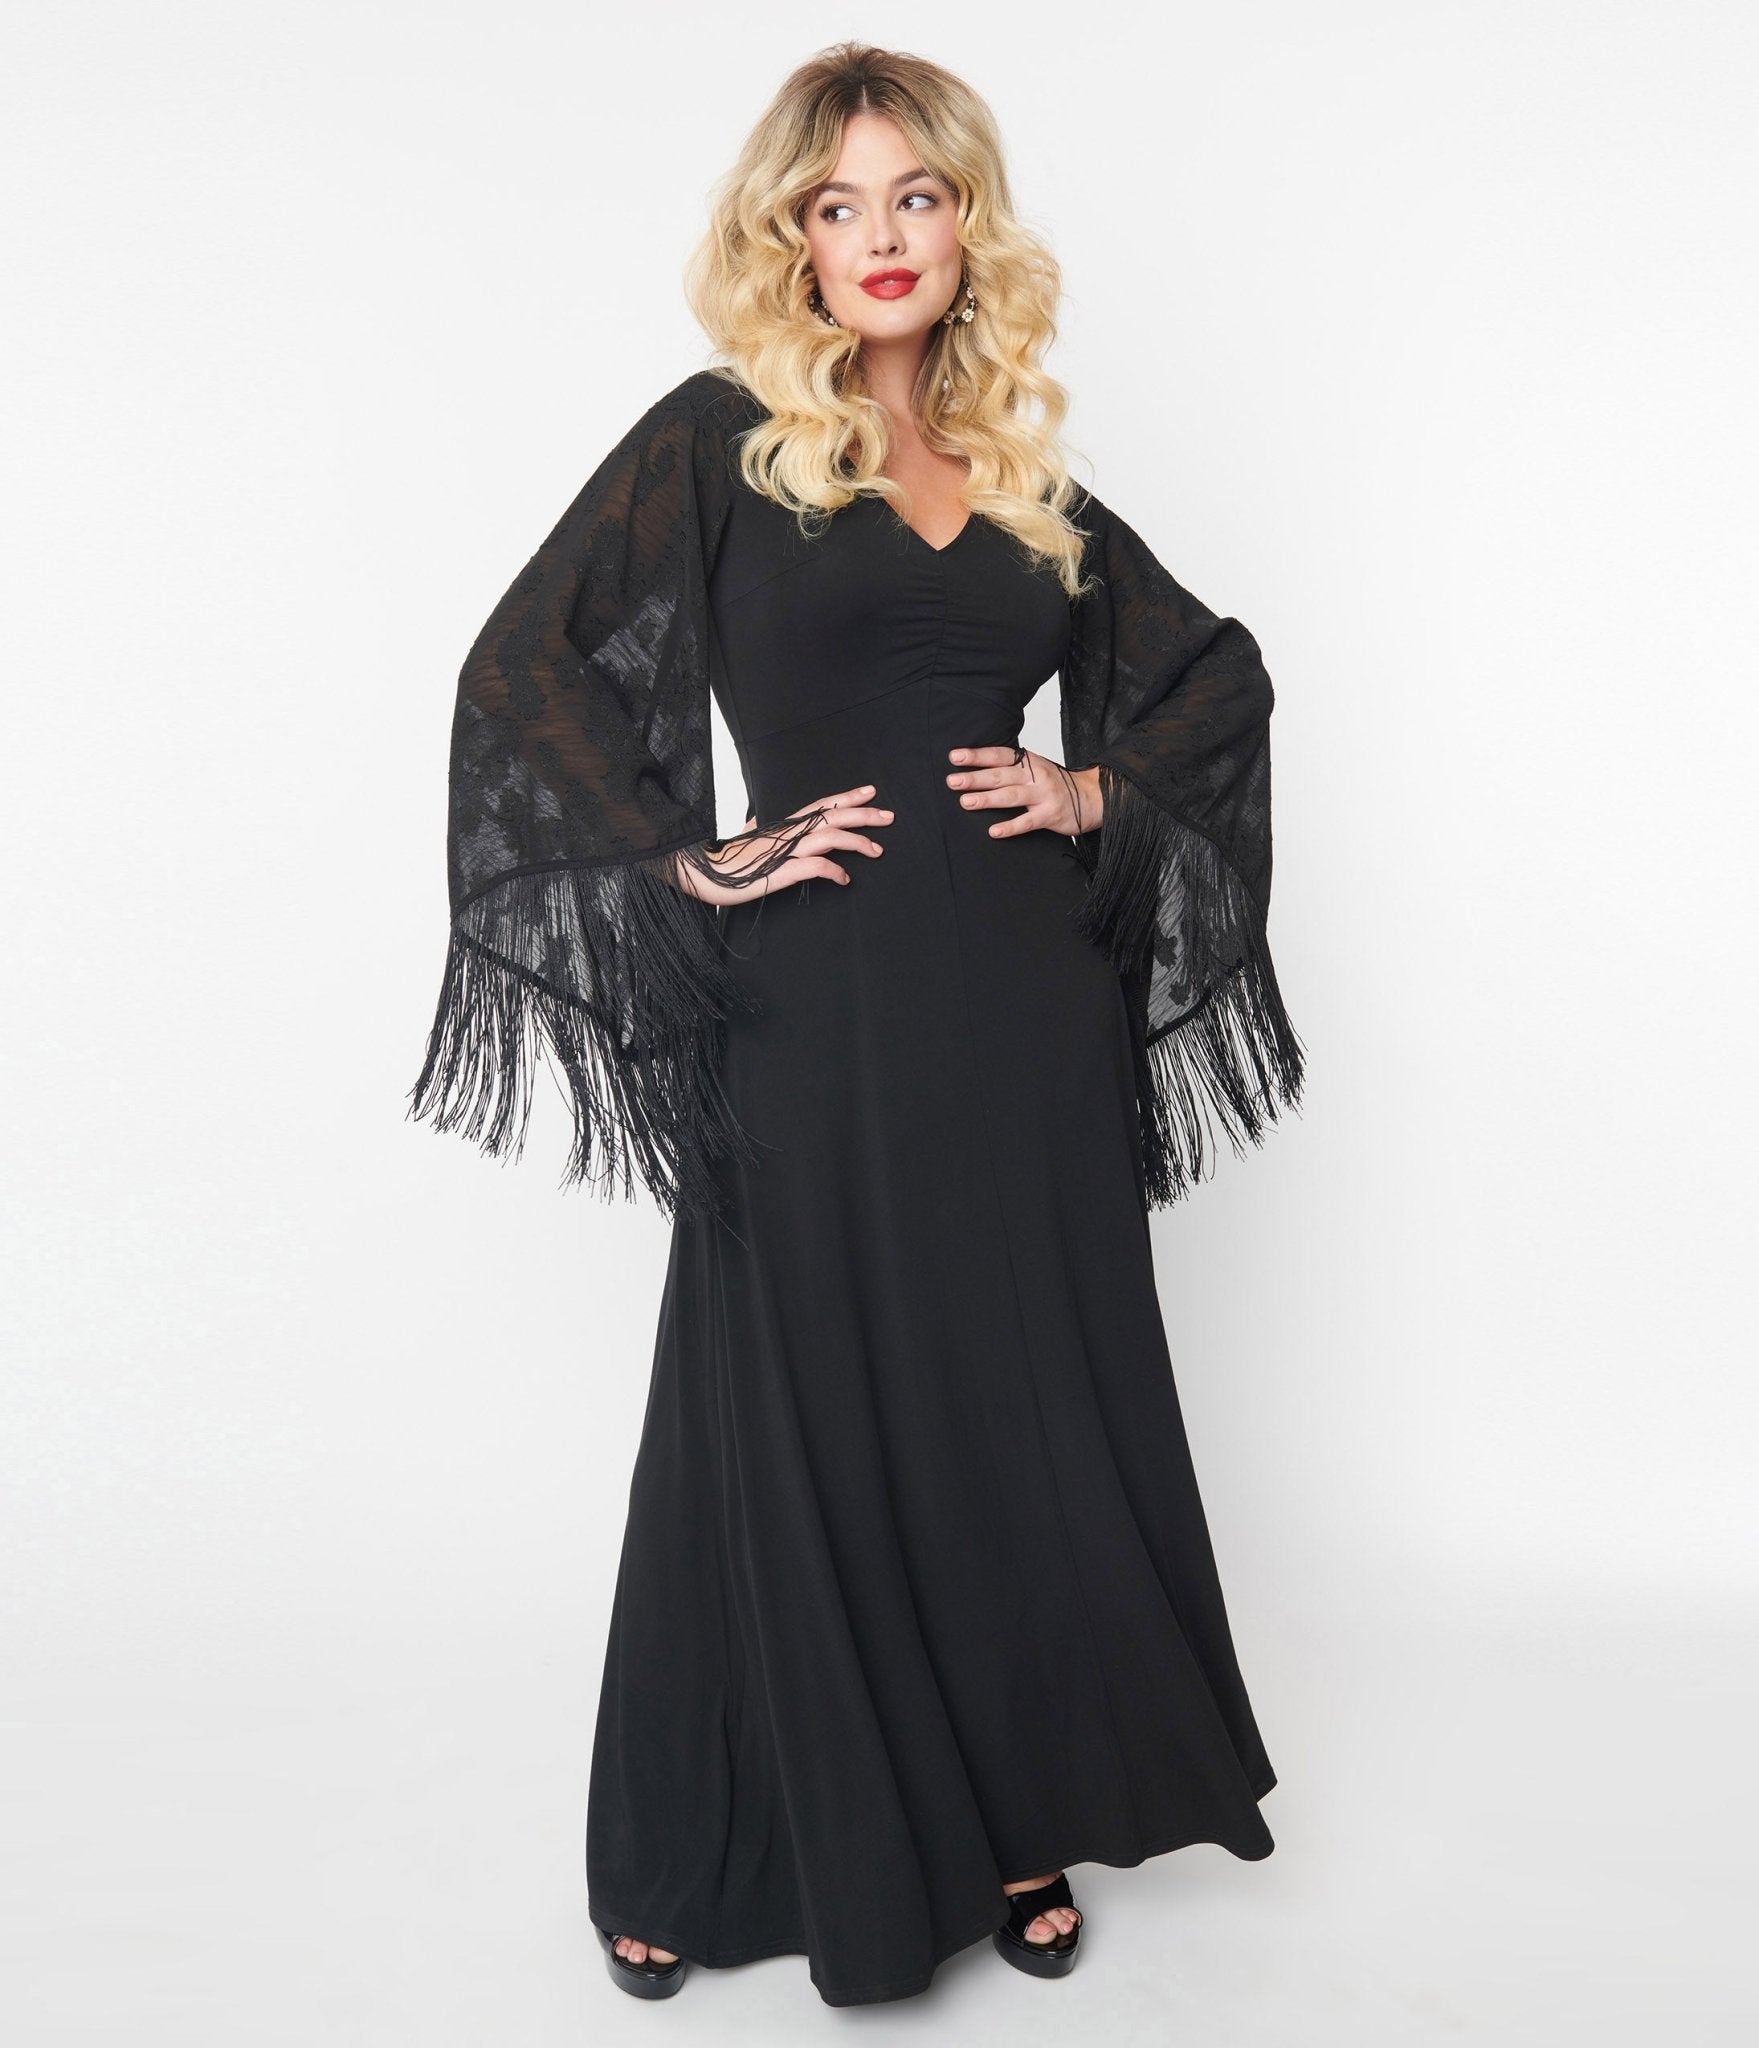 Plus Size Gothic Clothing – The Mystery Of The Dark!